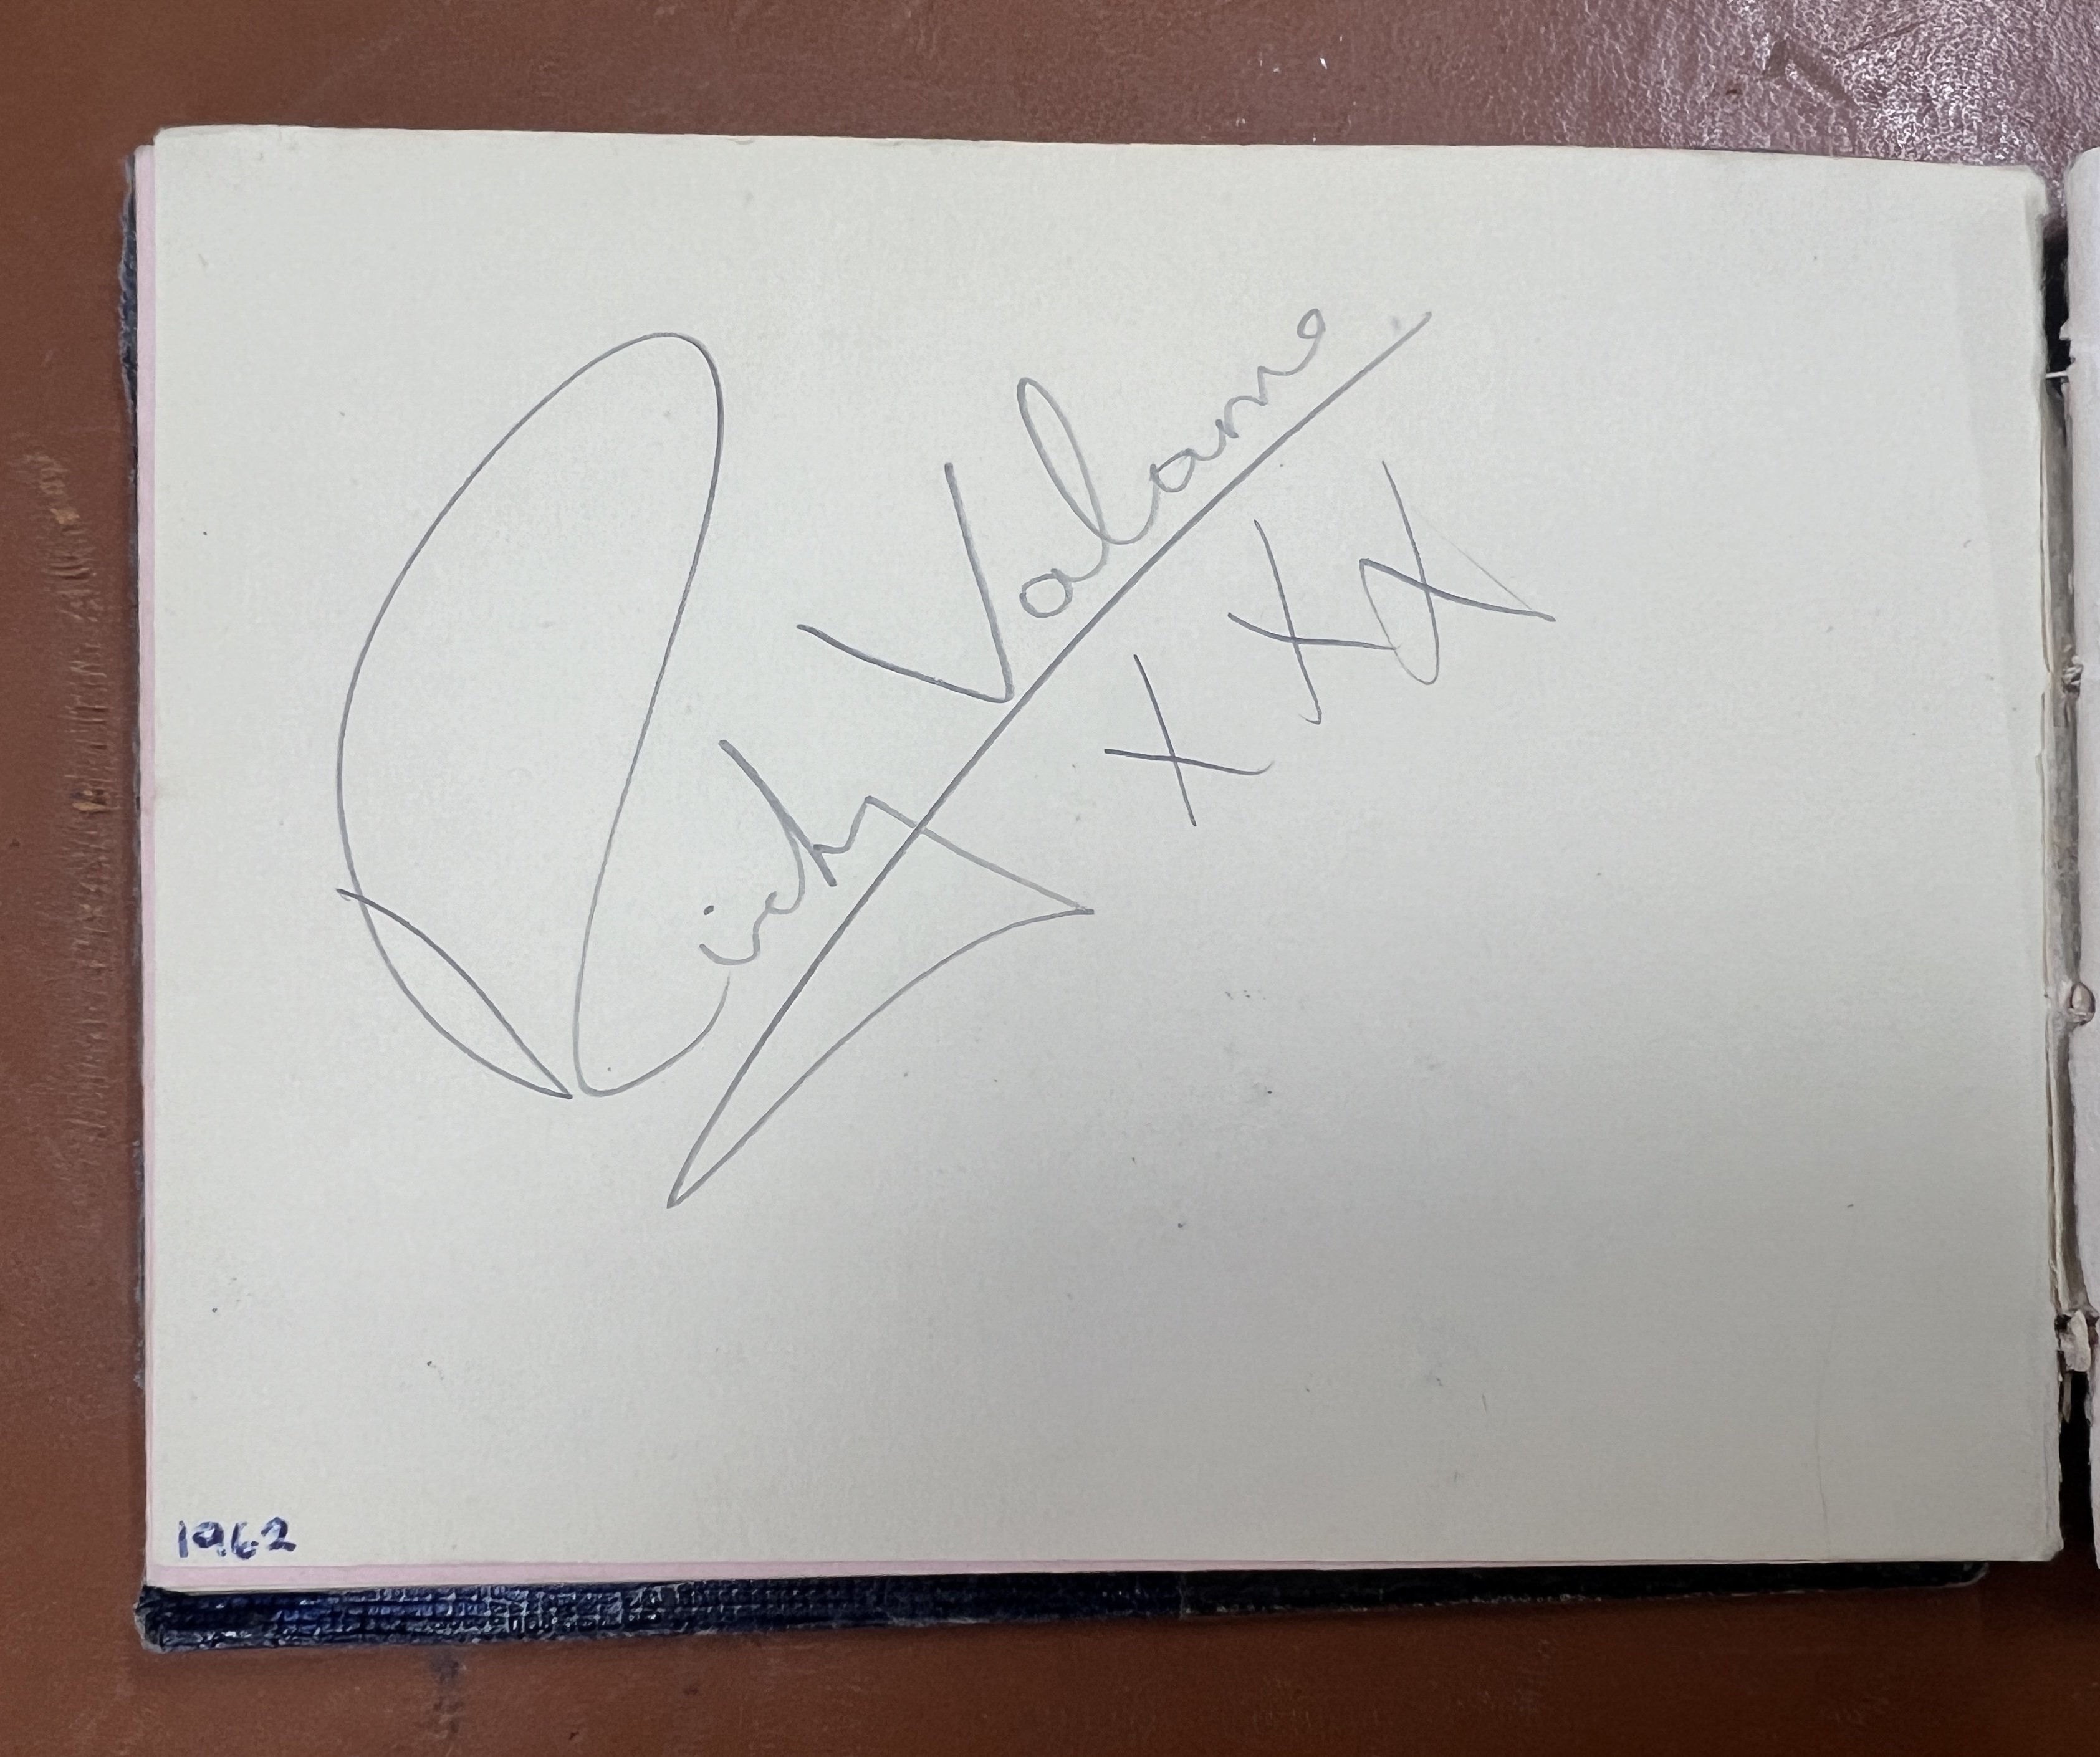 A 1960's autograph album containing autographs of various celebrities including Cliff Richard, - Image 18 of 37